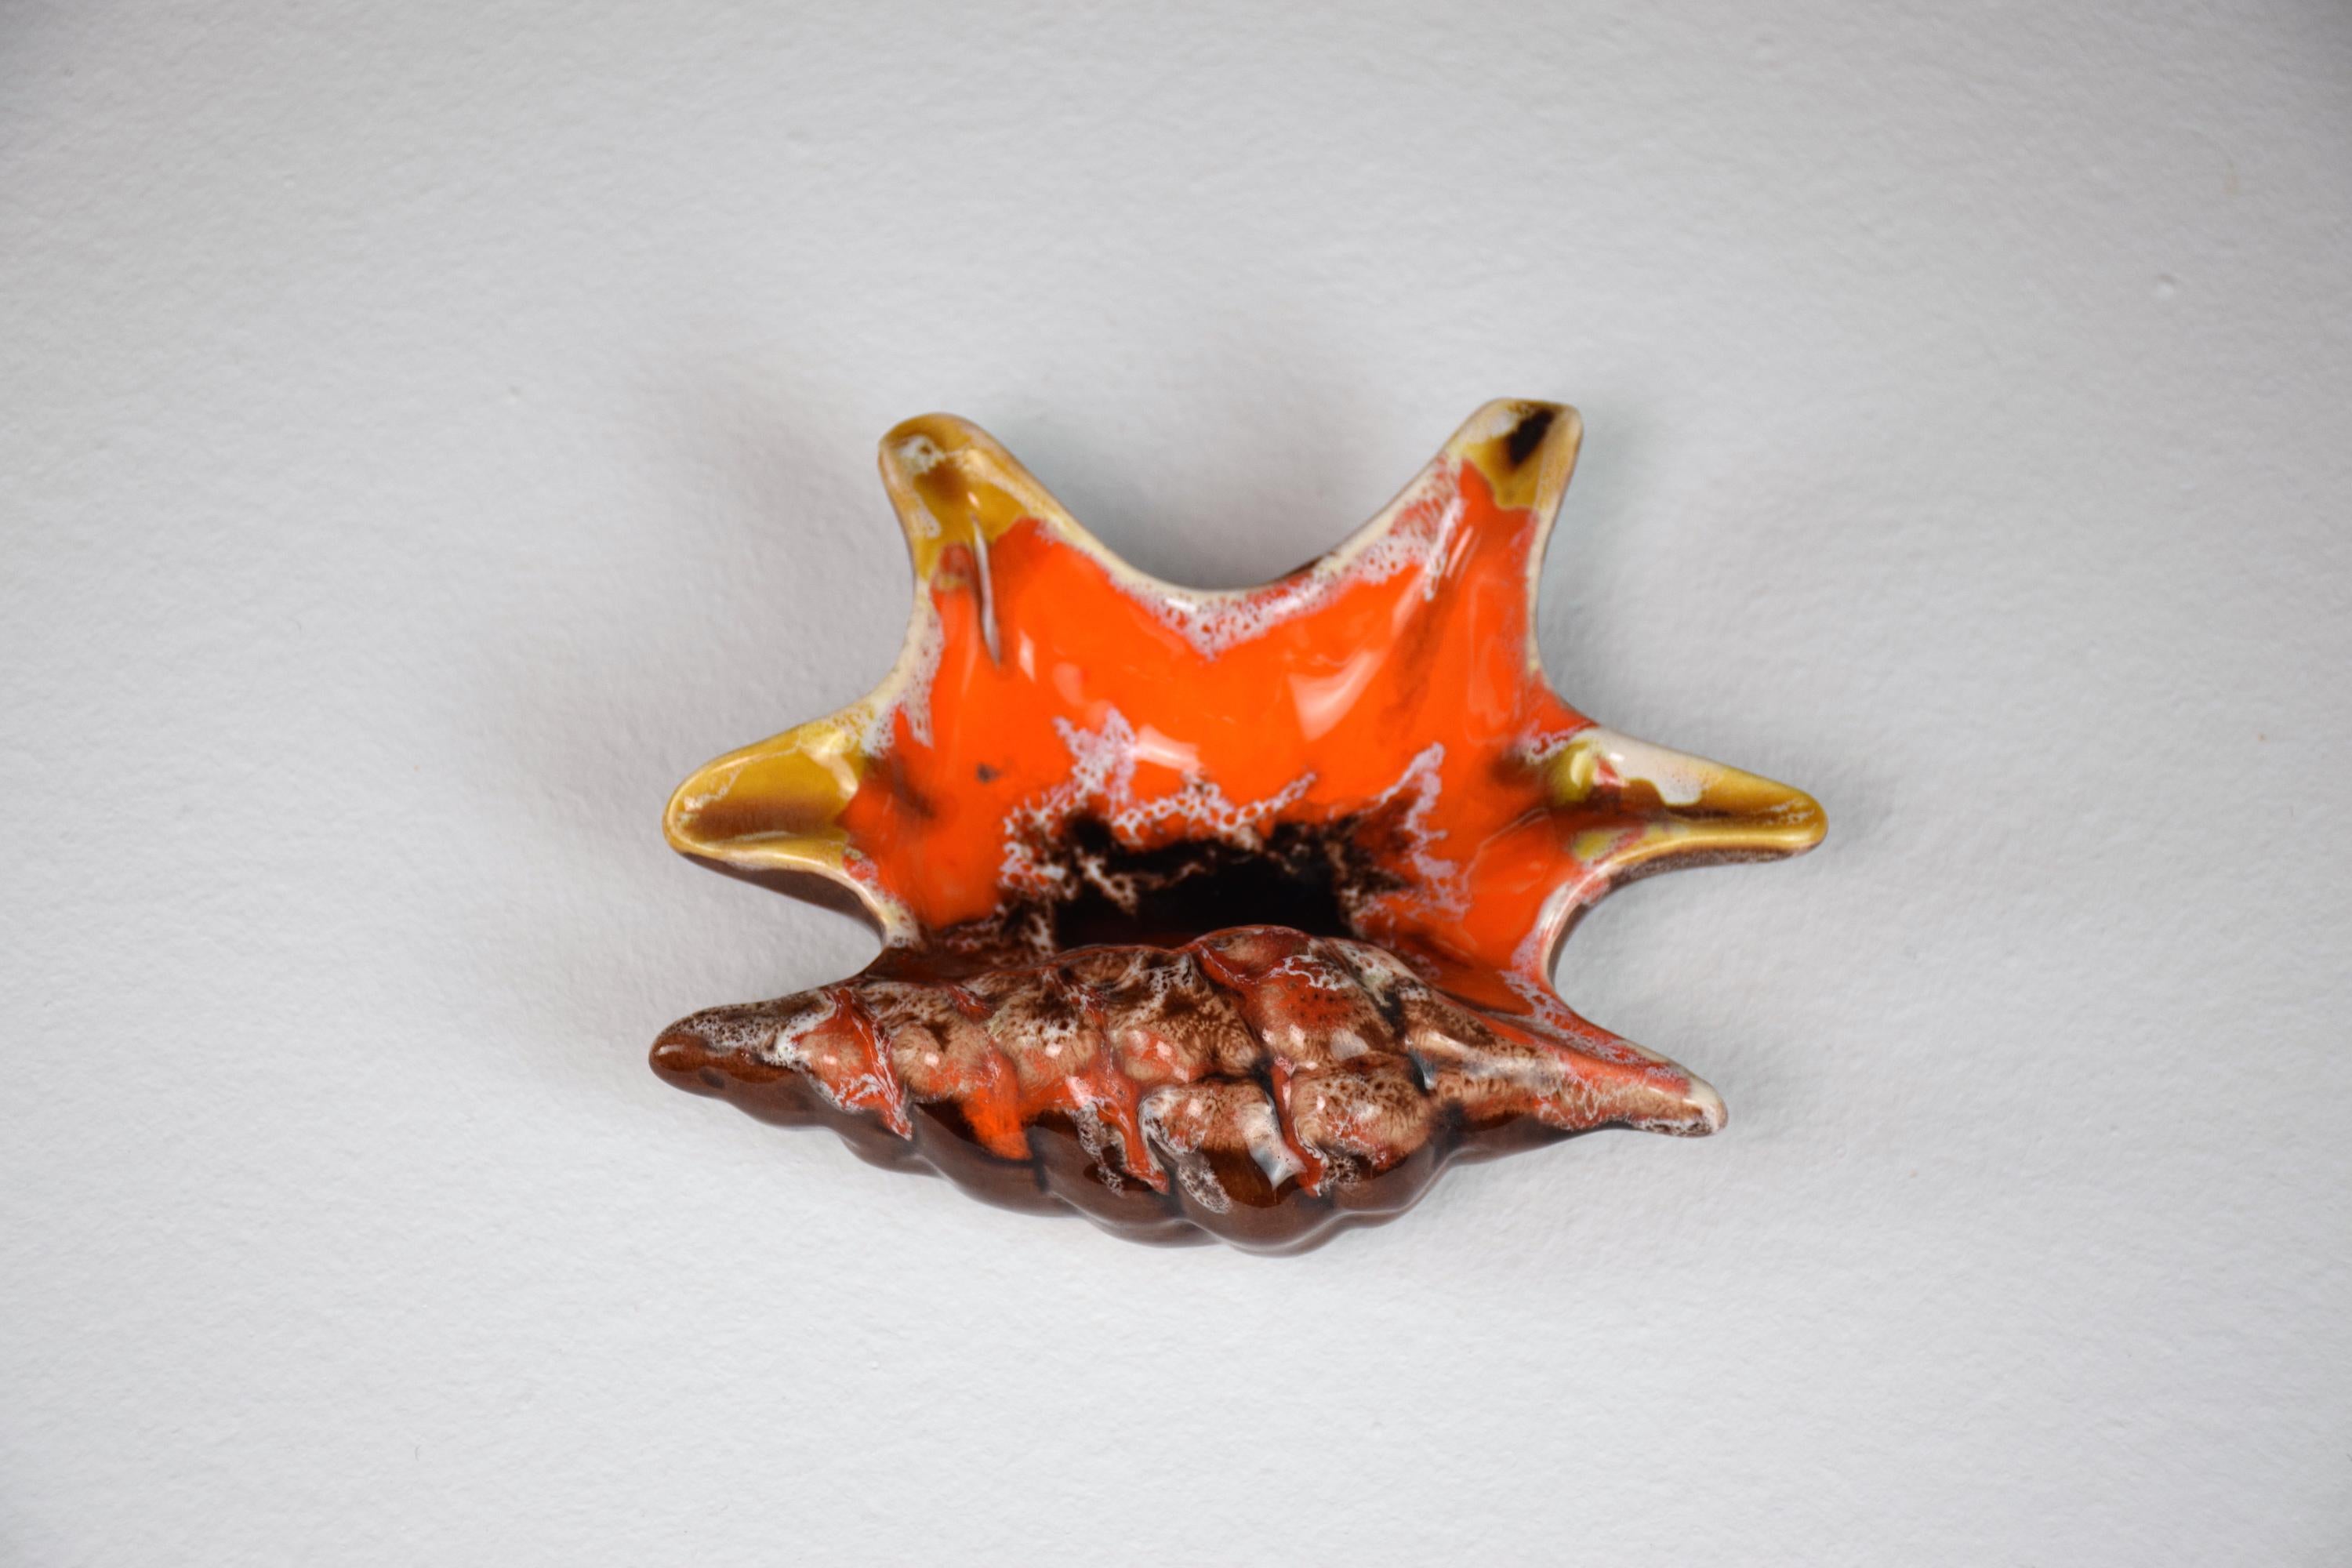 French vintage 1960's-1970's ceramic ashtray by Vallauris in the shape of an orange brown shellfish with specks of gold on the edges.

-------------------

We are an exhibition space and an online destination established by the passionate art